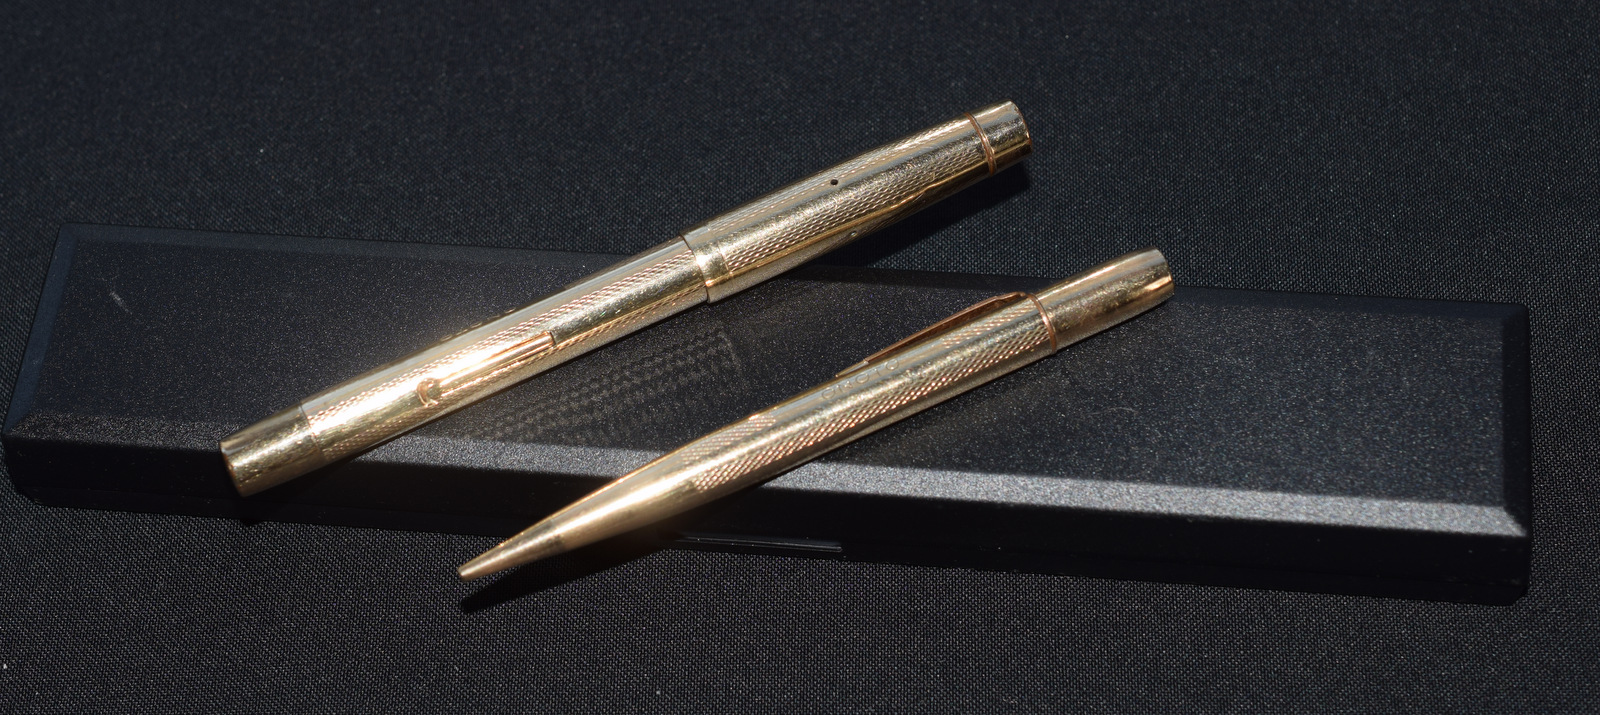 Onoto Pountain Pen And Pencil Set - Image 4 of 4